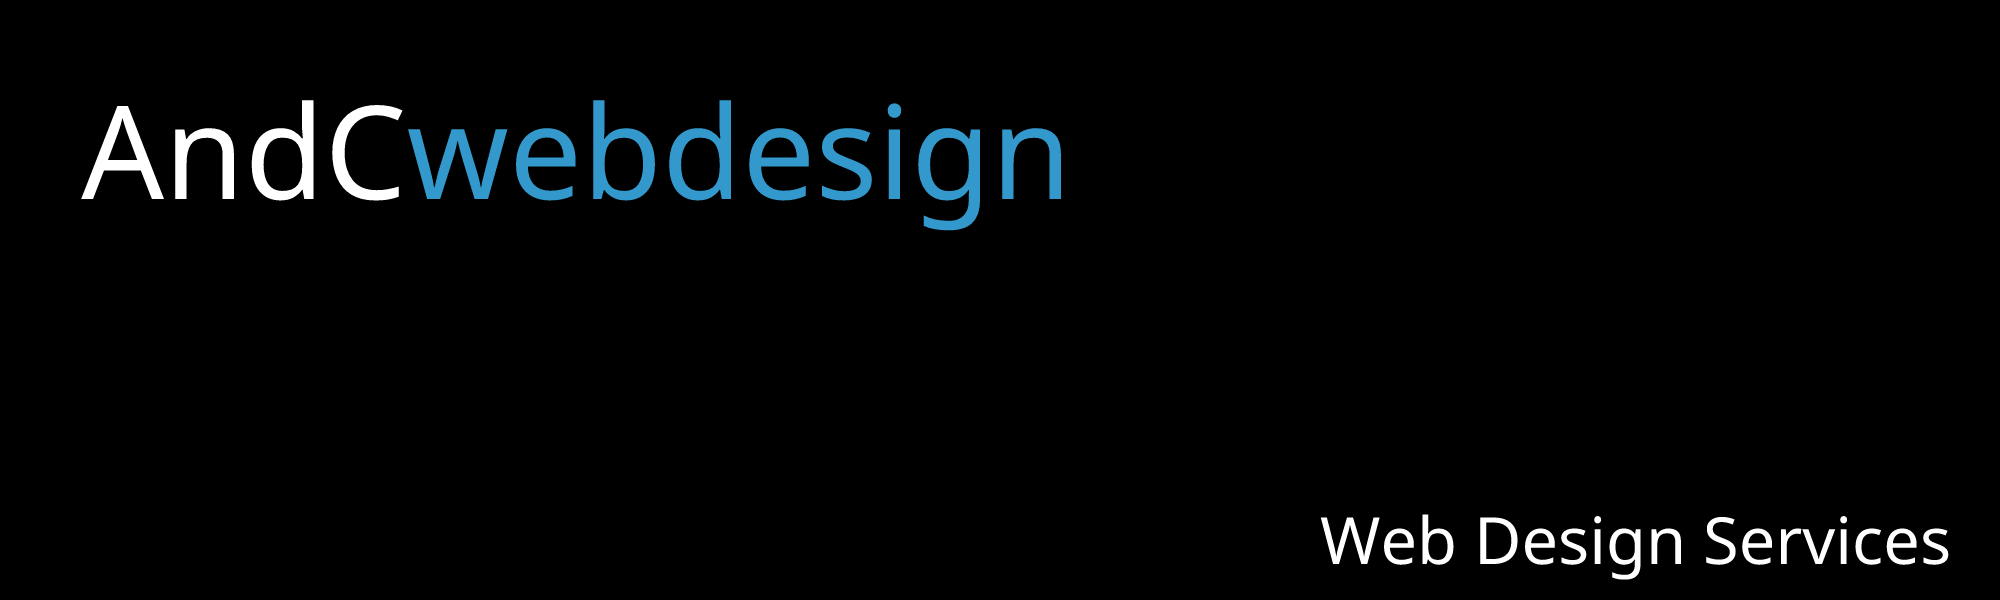 Andcwedesign webdesign services